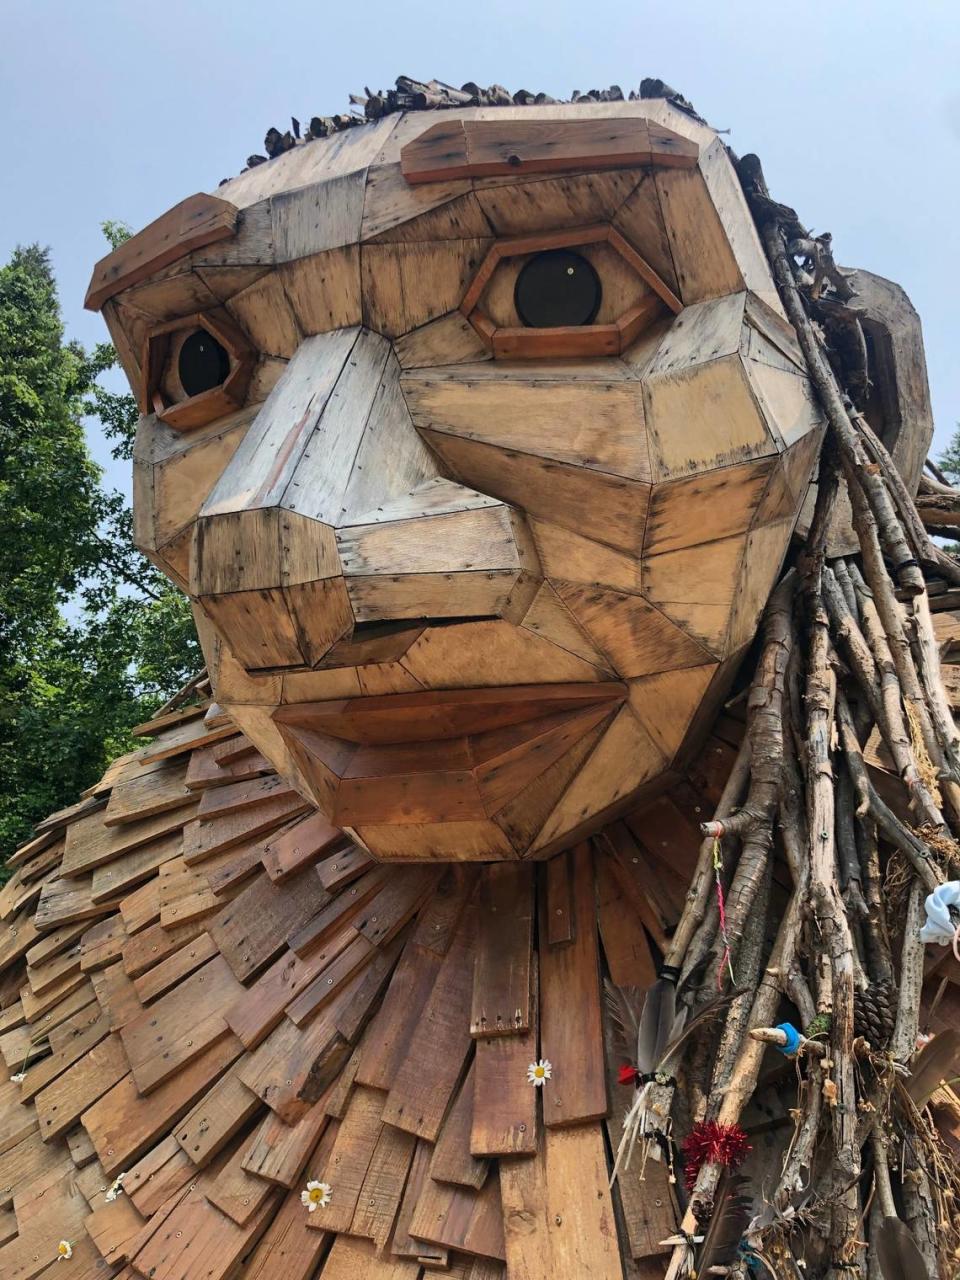 Little Elina, one of the three wooden giants at the Bernheim Arboretum and Research Forest.